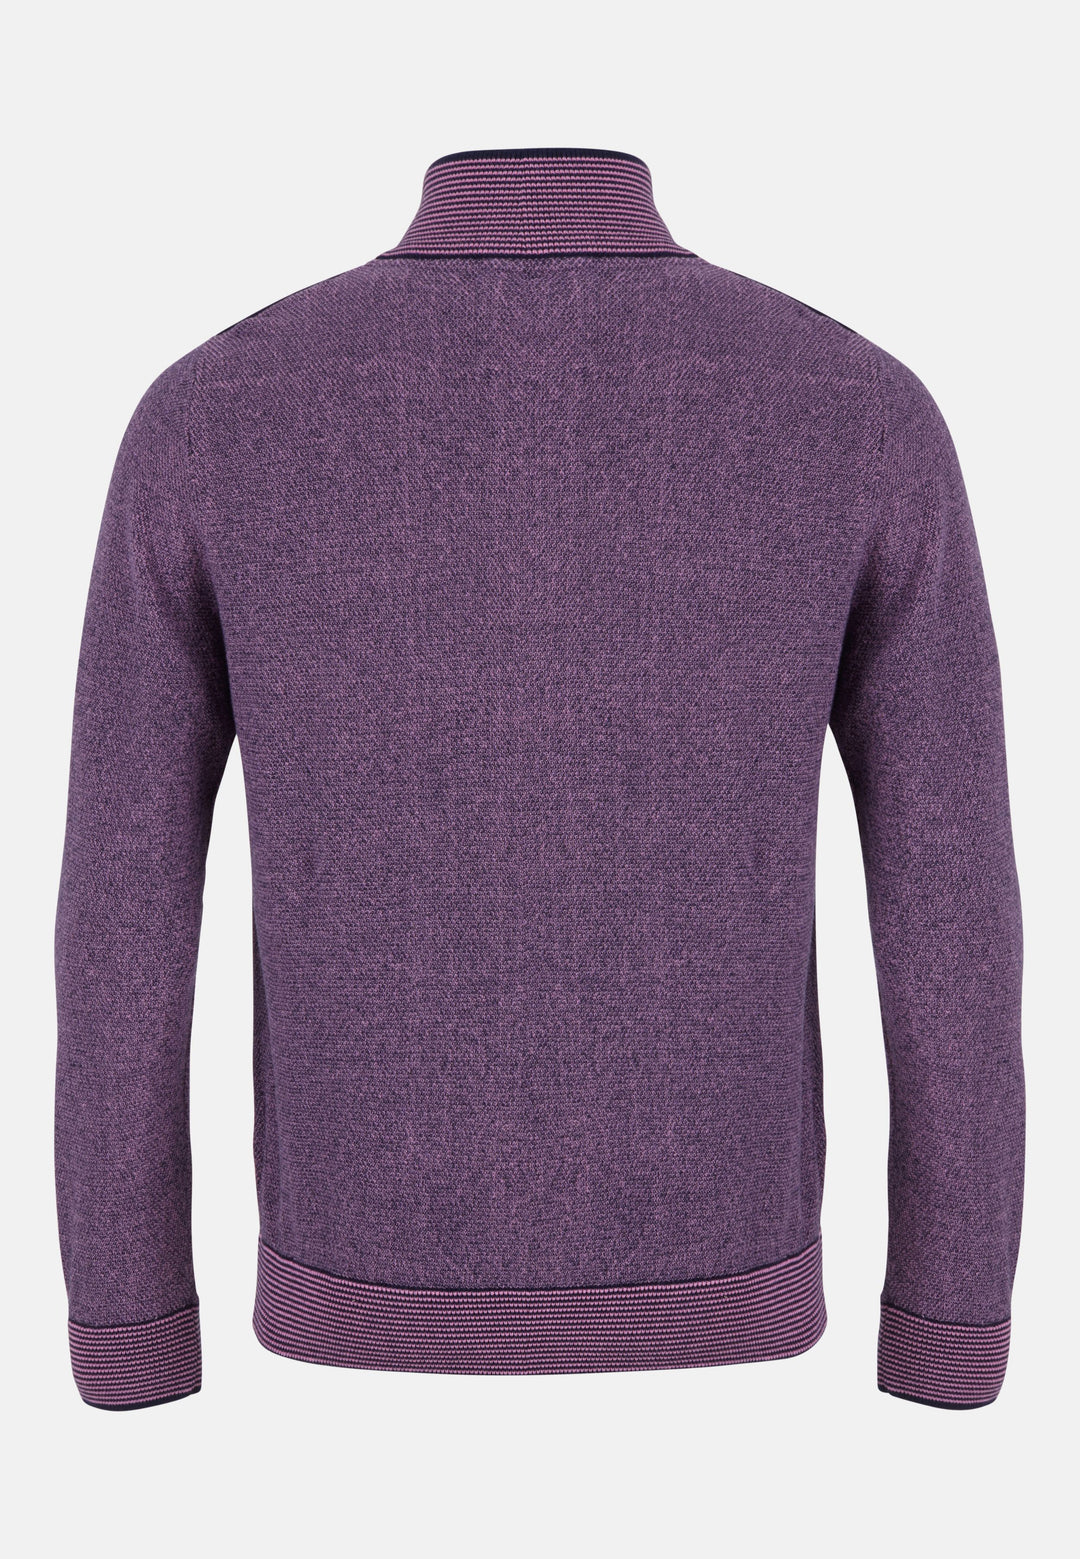  A 6th Sense Men's pink-and-navy-mix knitted cotton jumper with navy trim detail and striped detail on collar, cuffs, and hem.